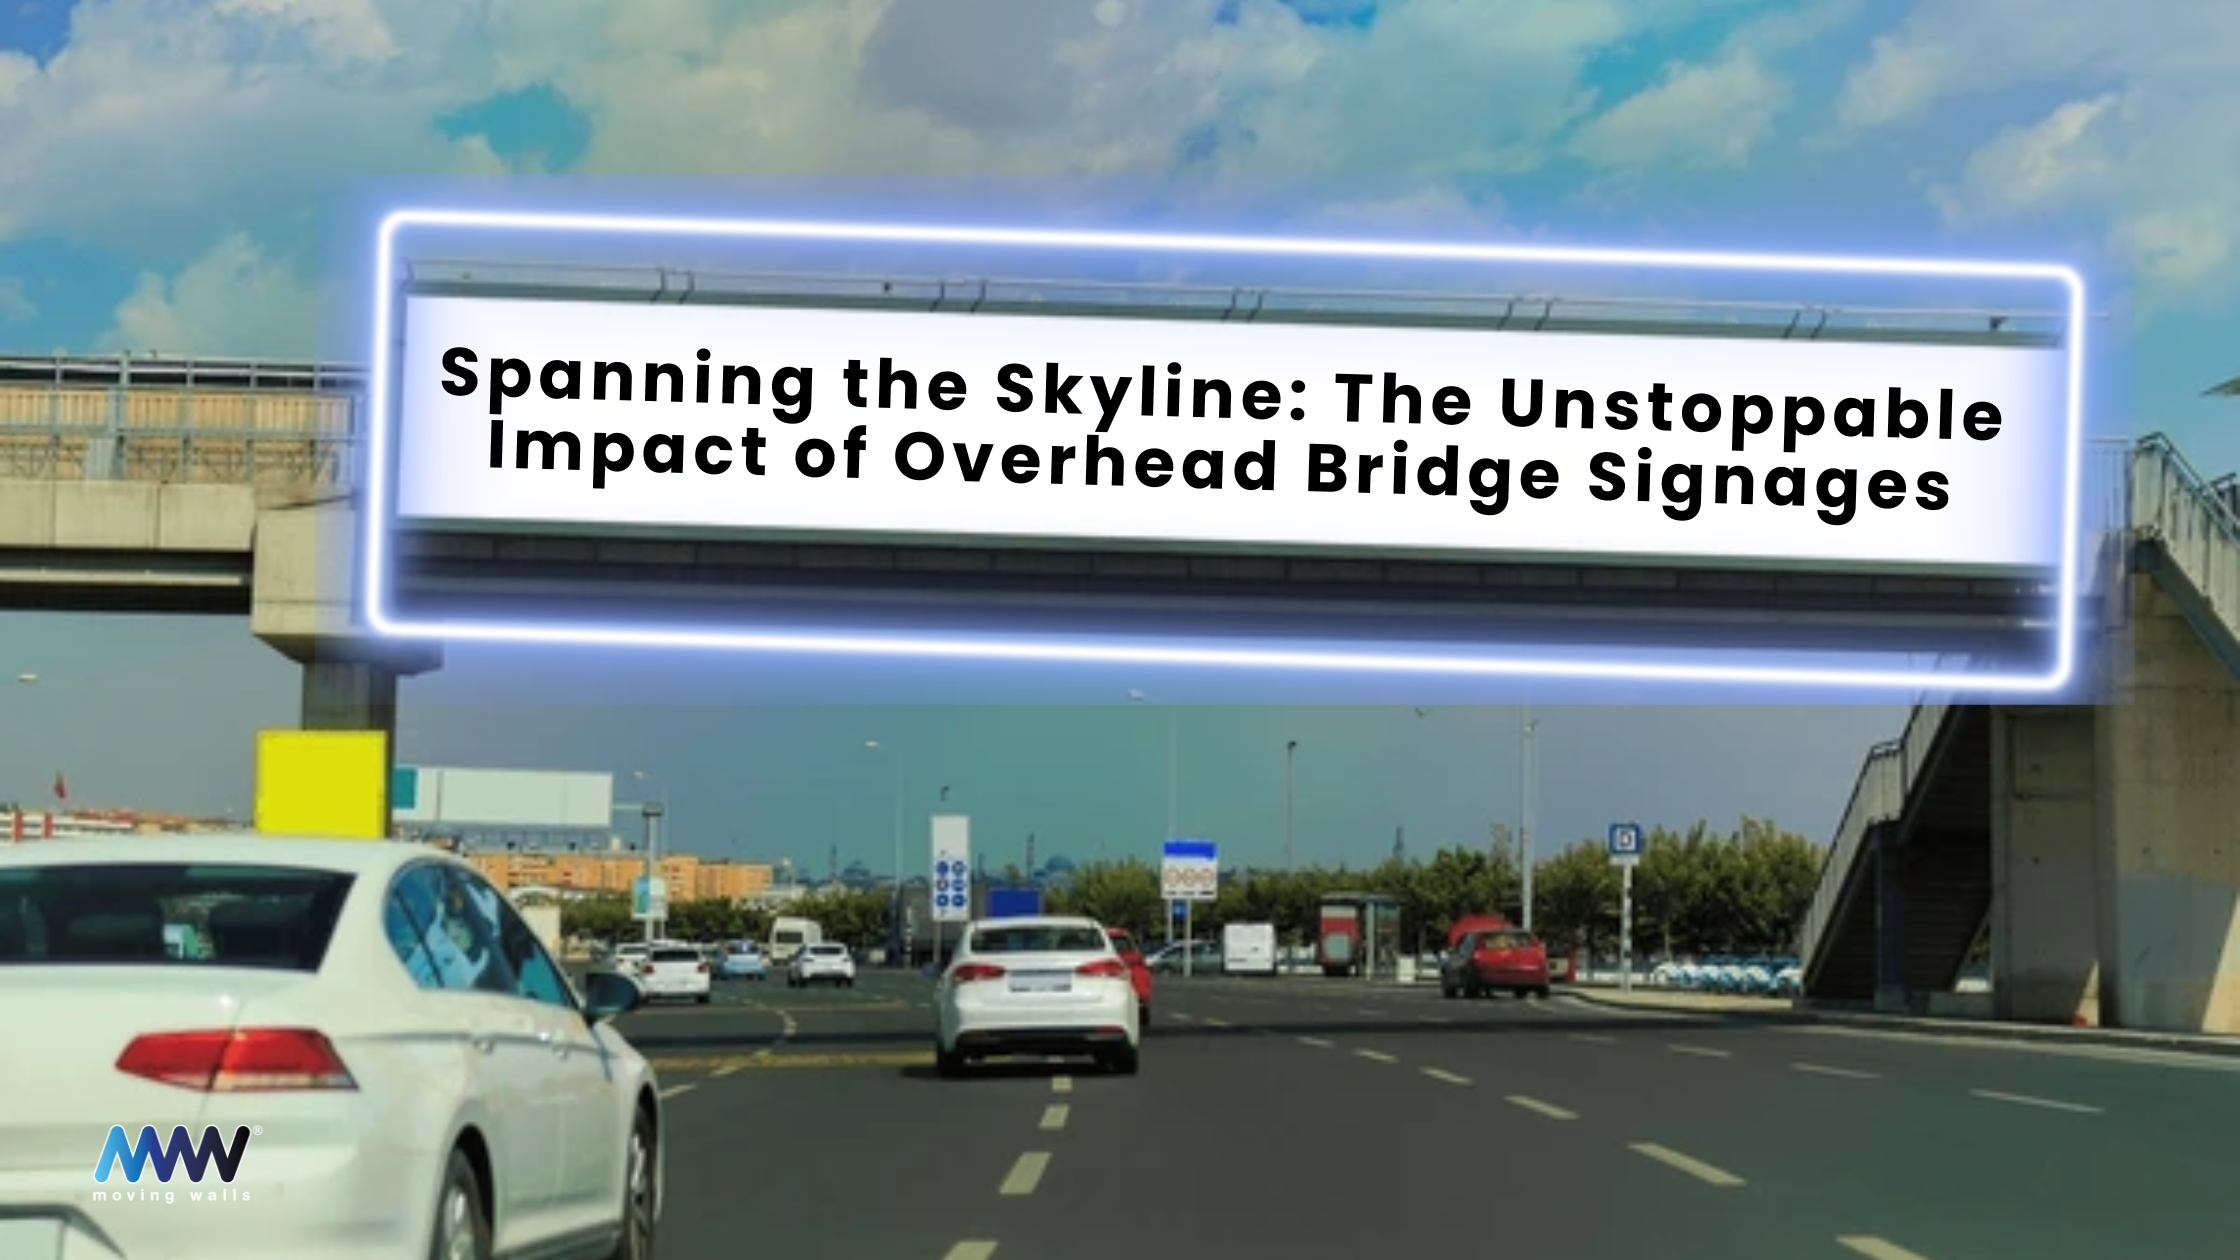 Spanning the Skyline: The Unstoppable Impact of Overhead Bridge Signages